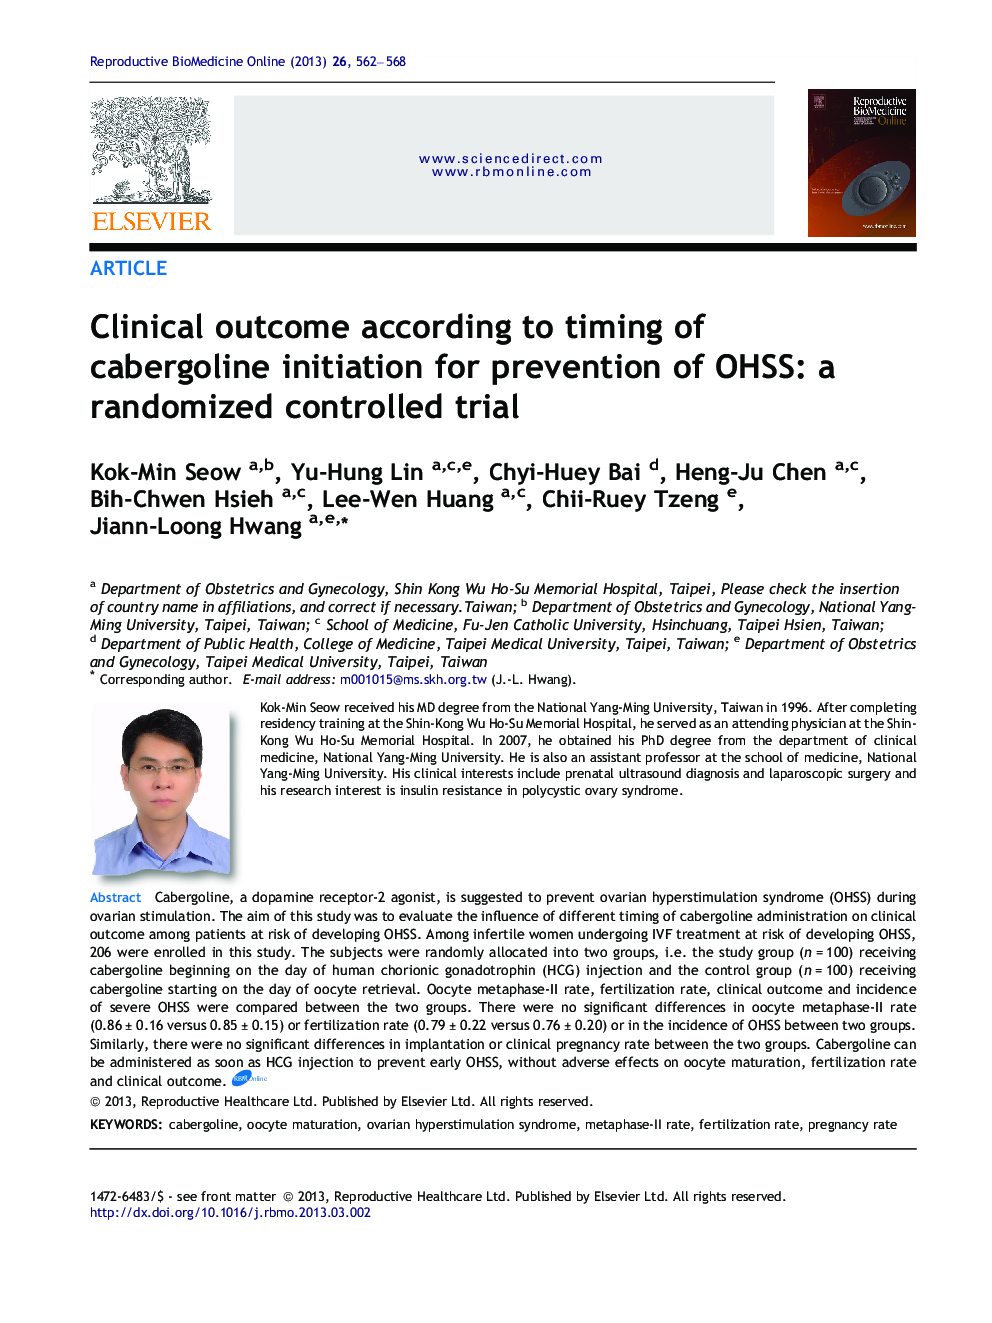 Clinical outcome according to timing of cabergoline initiation for prevention of OHSS: a randomized controlled trial